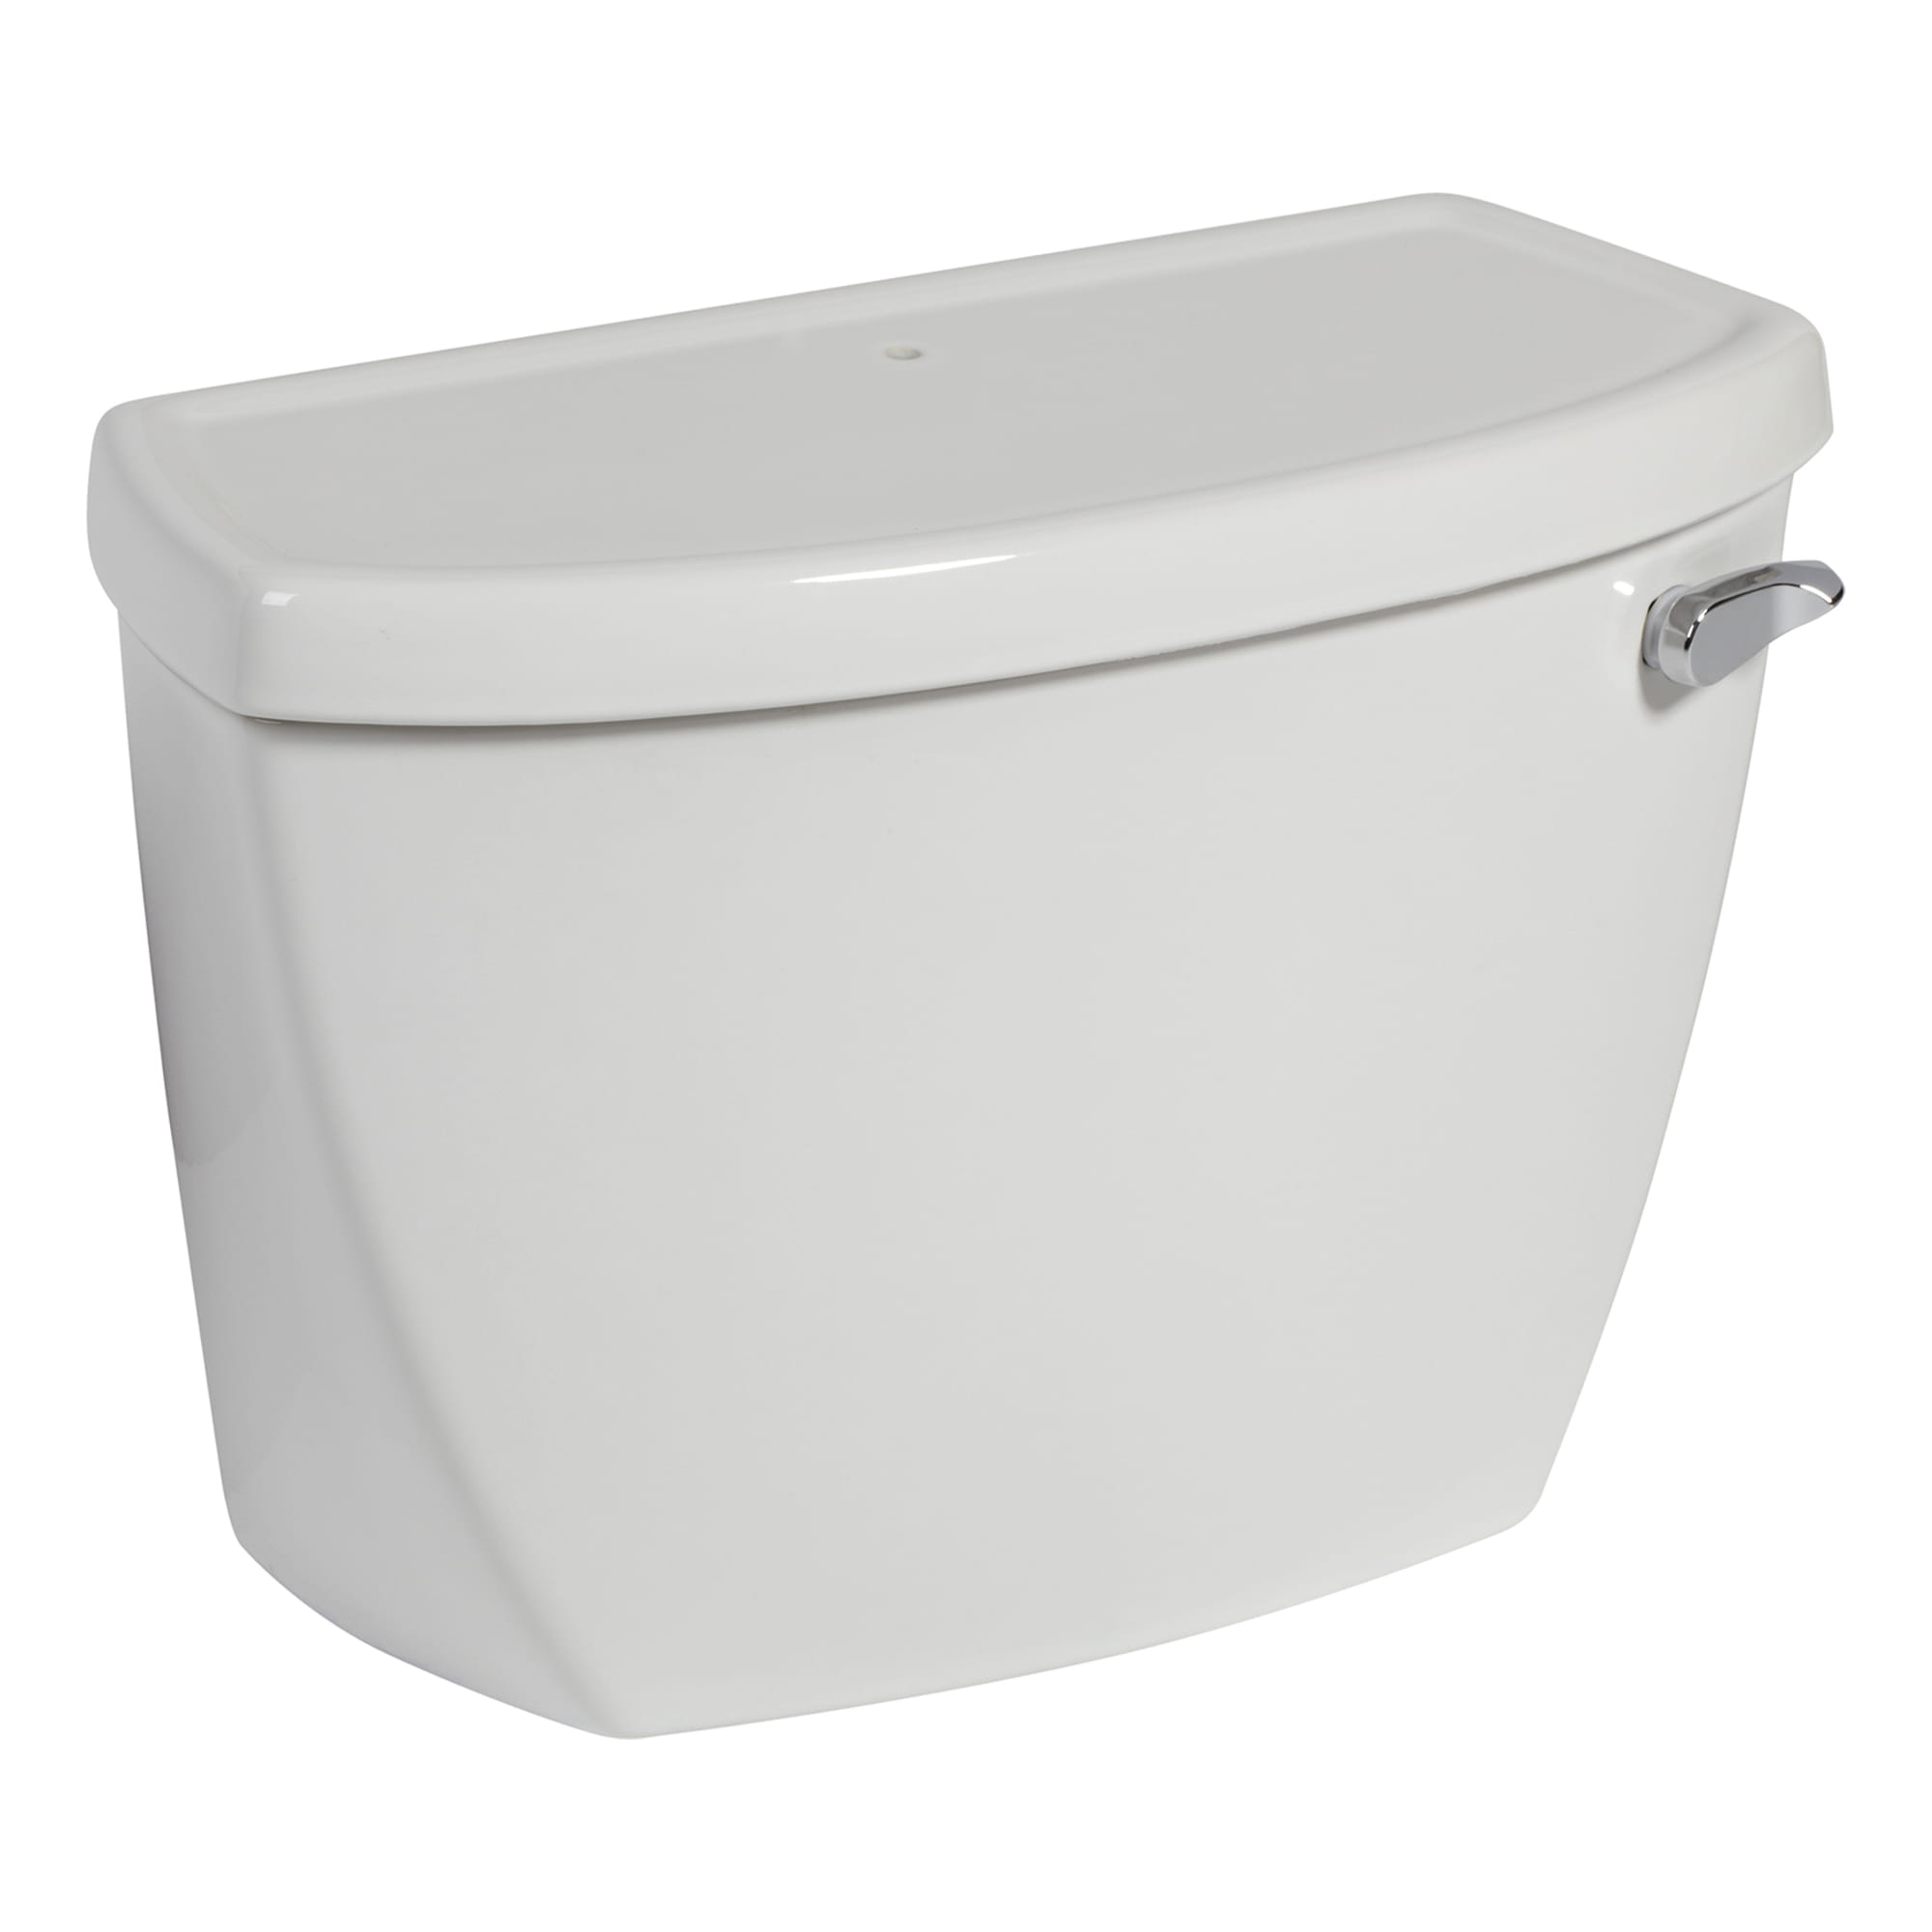 American Standard 2878.100.020 Yorkville Flowise Right-Height Pressure Assisted Elongated Two-Piece Toilet White 